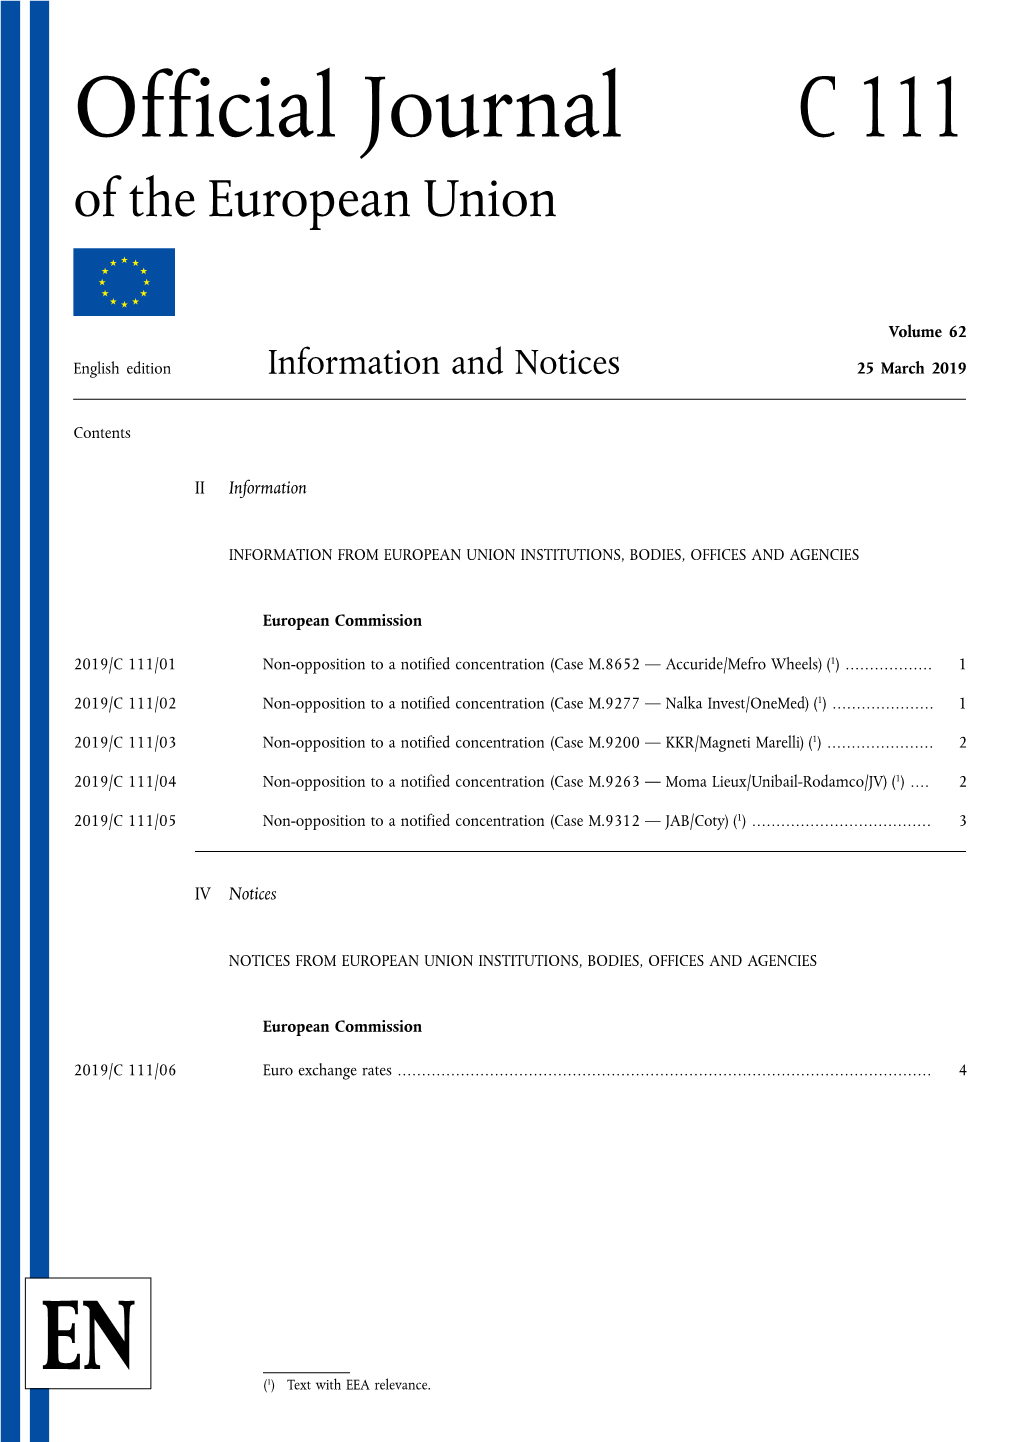 Official Journal C 111 of the European Union